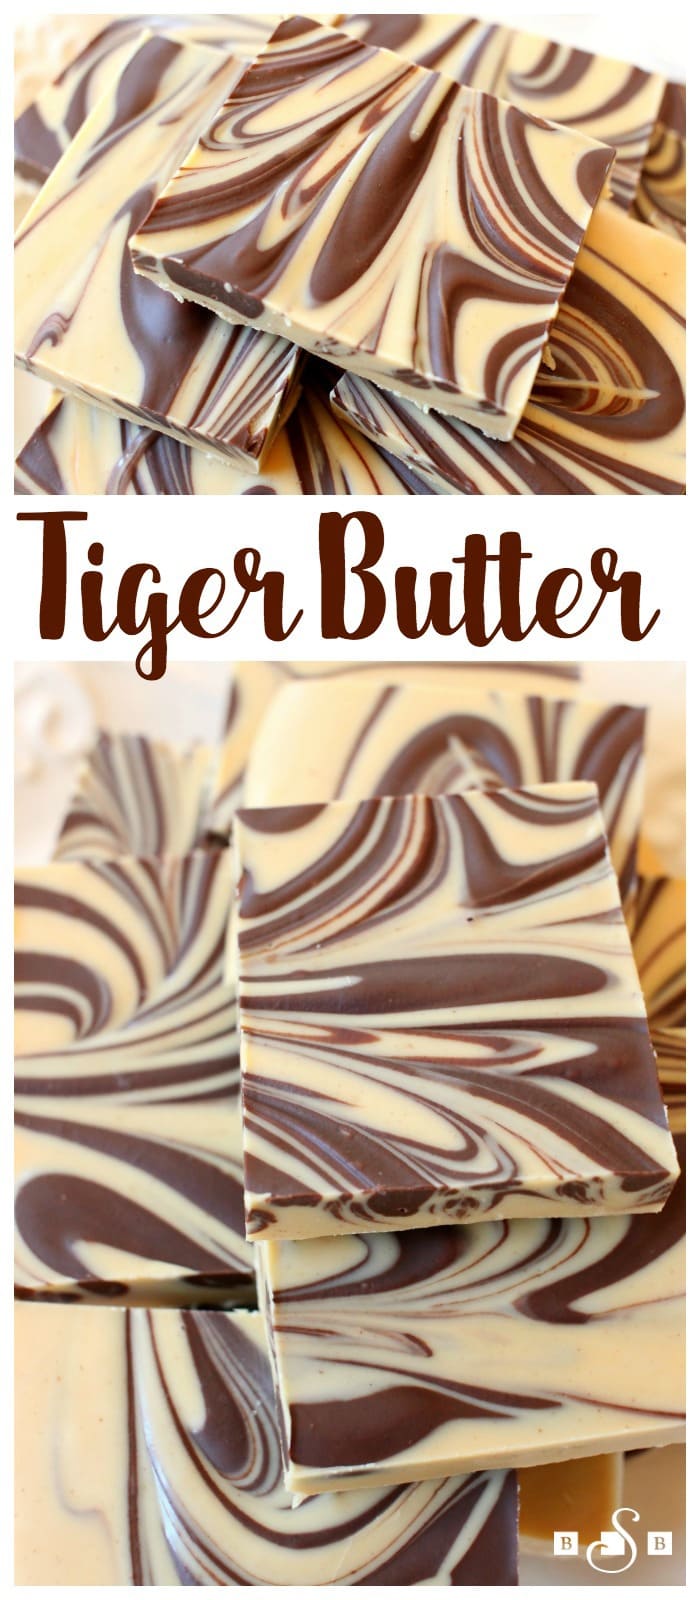 Tiger Butter made from 3 ingredients that are melted & swirled together. Gorgeous #holiday candy recipe with great peanut butter #chocolate flavor. Easy #candy recipe from Butter With A Side of Bread